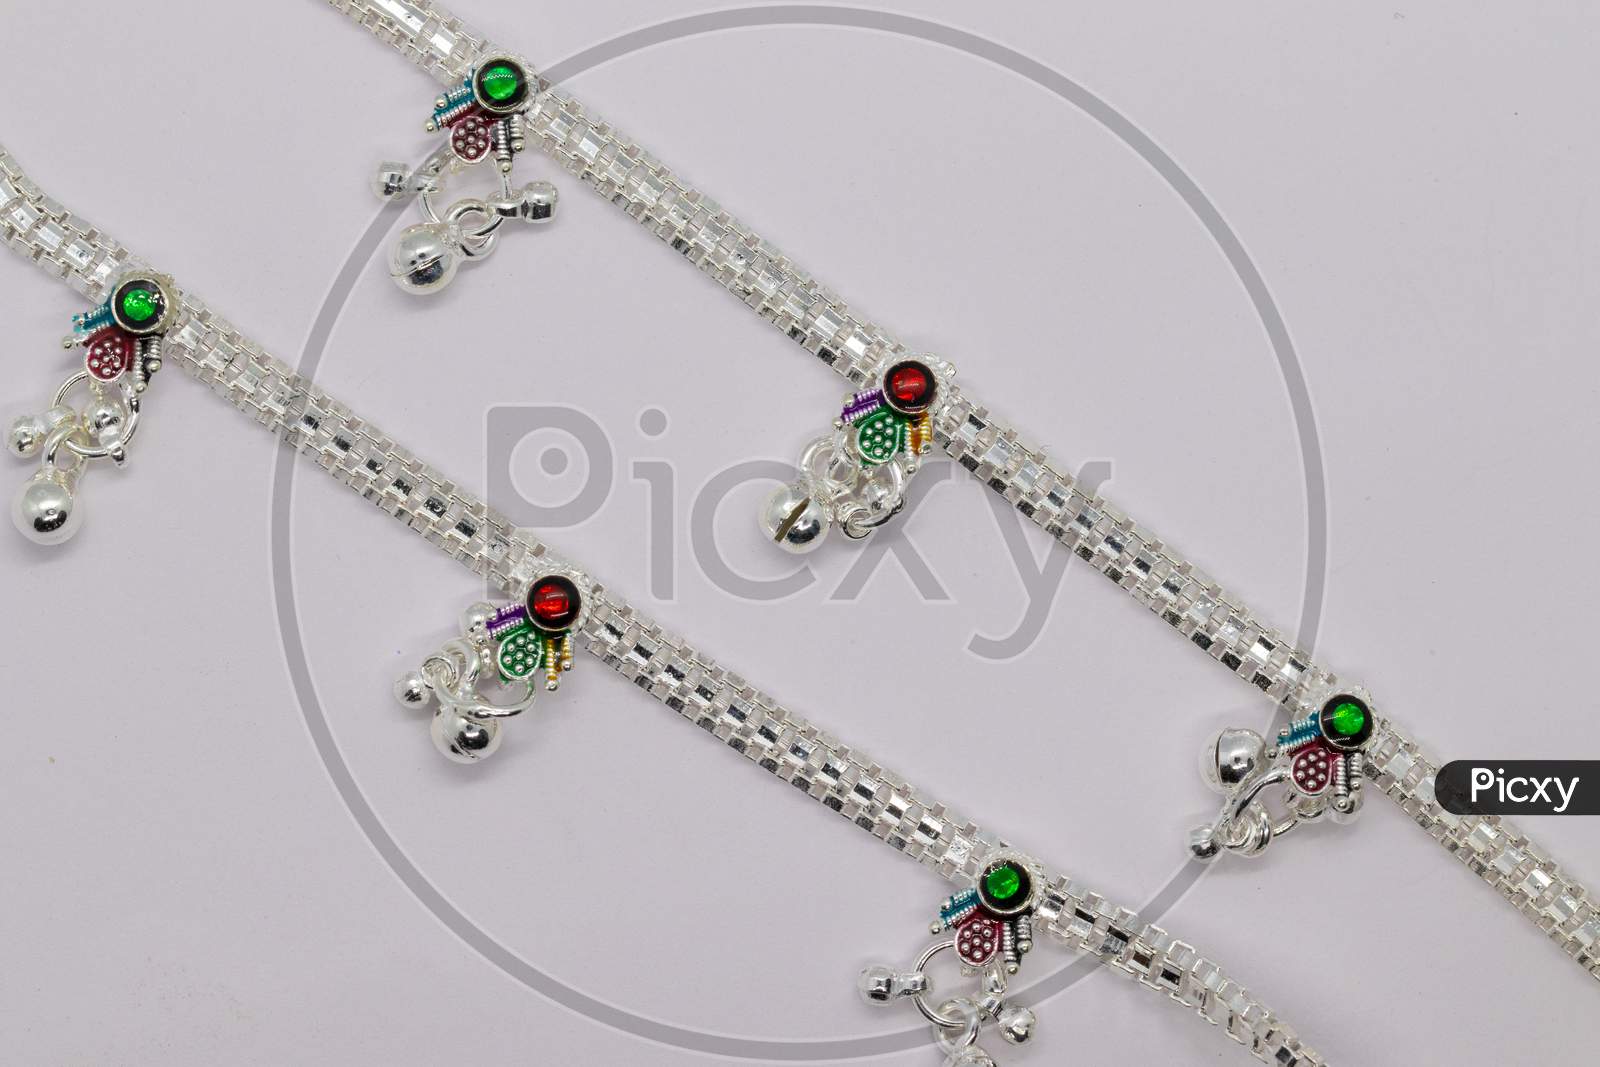 Two Pair Leg Chains With Anklets For Design (Anklet)